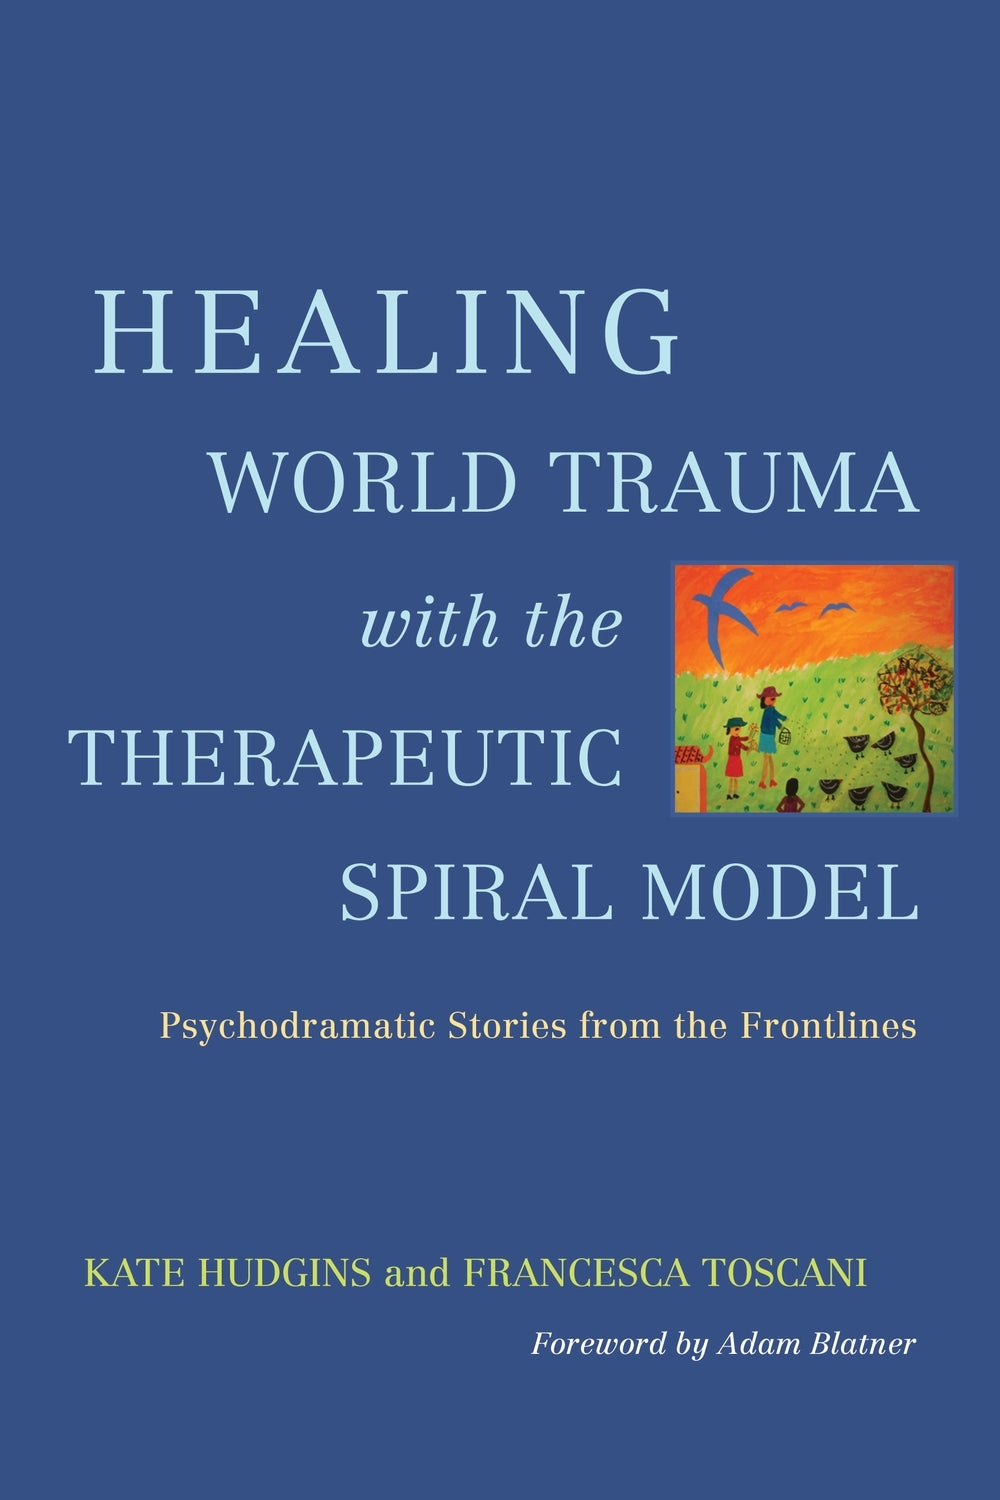 Healing World Trauma with the Therapeutic Spiral Model by Adam Blatner, Kate Hudgins, Francesca Toscani, No Author Listed